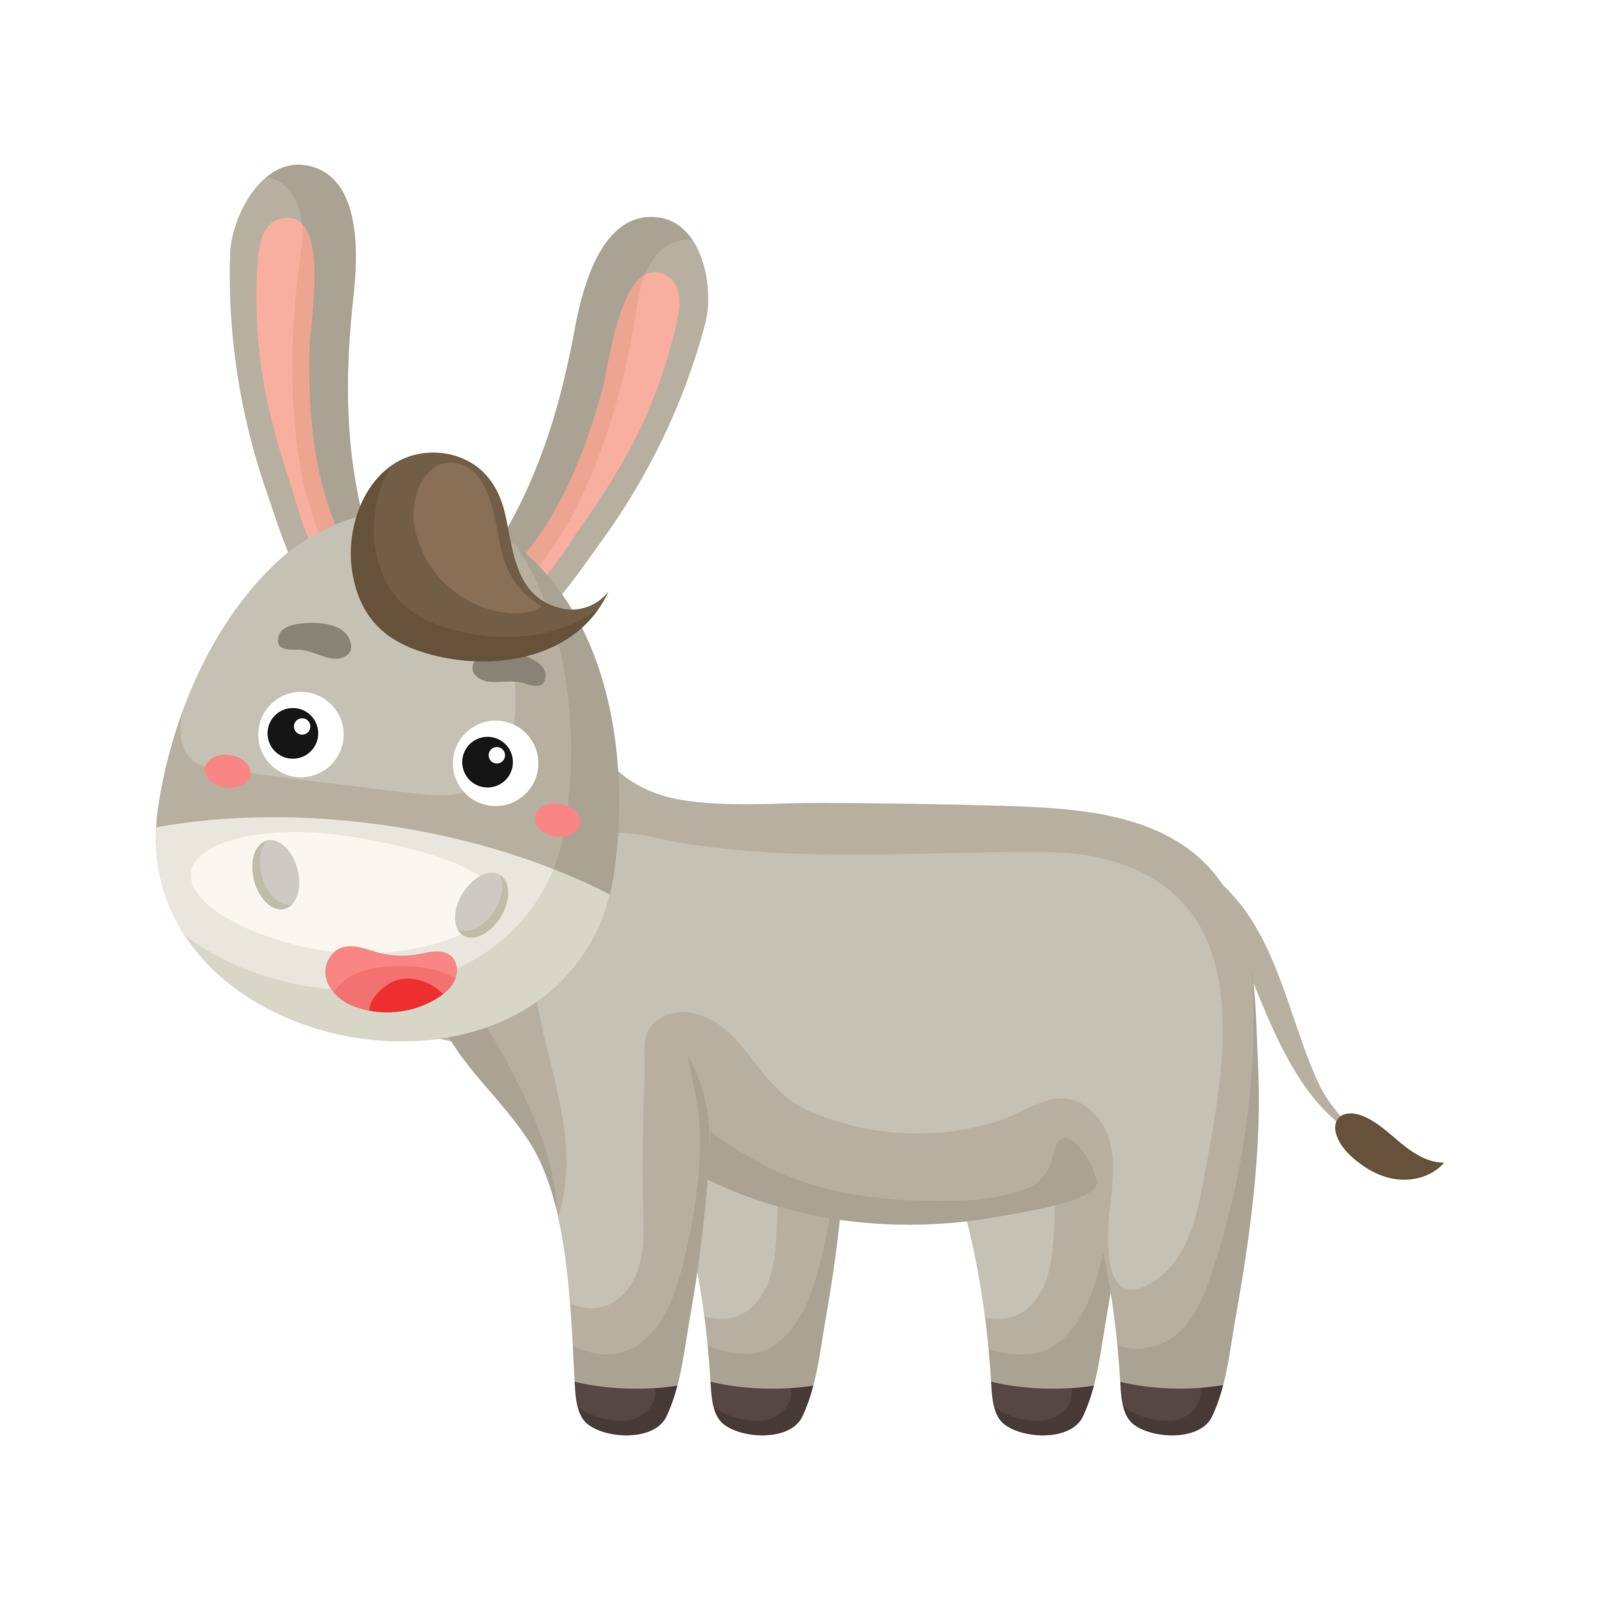 Cute funny donkey print on white background. Domestic cartoon an by Melnyk